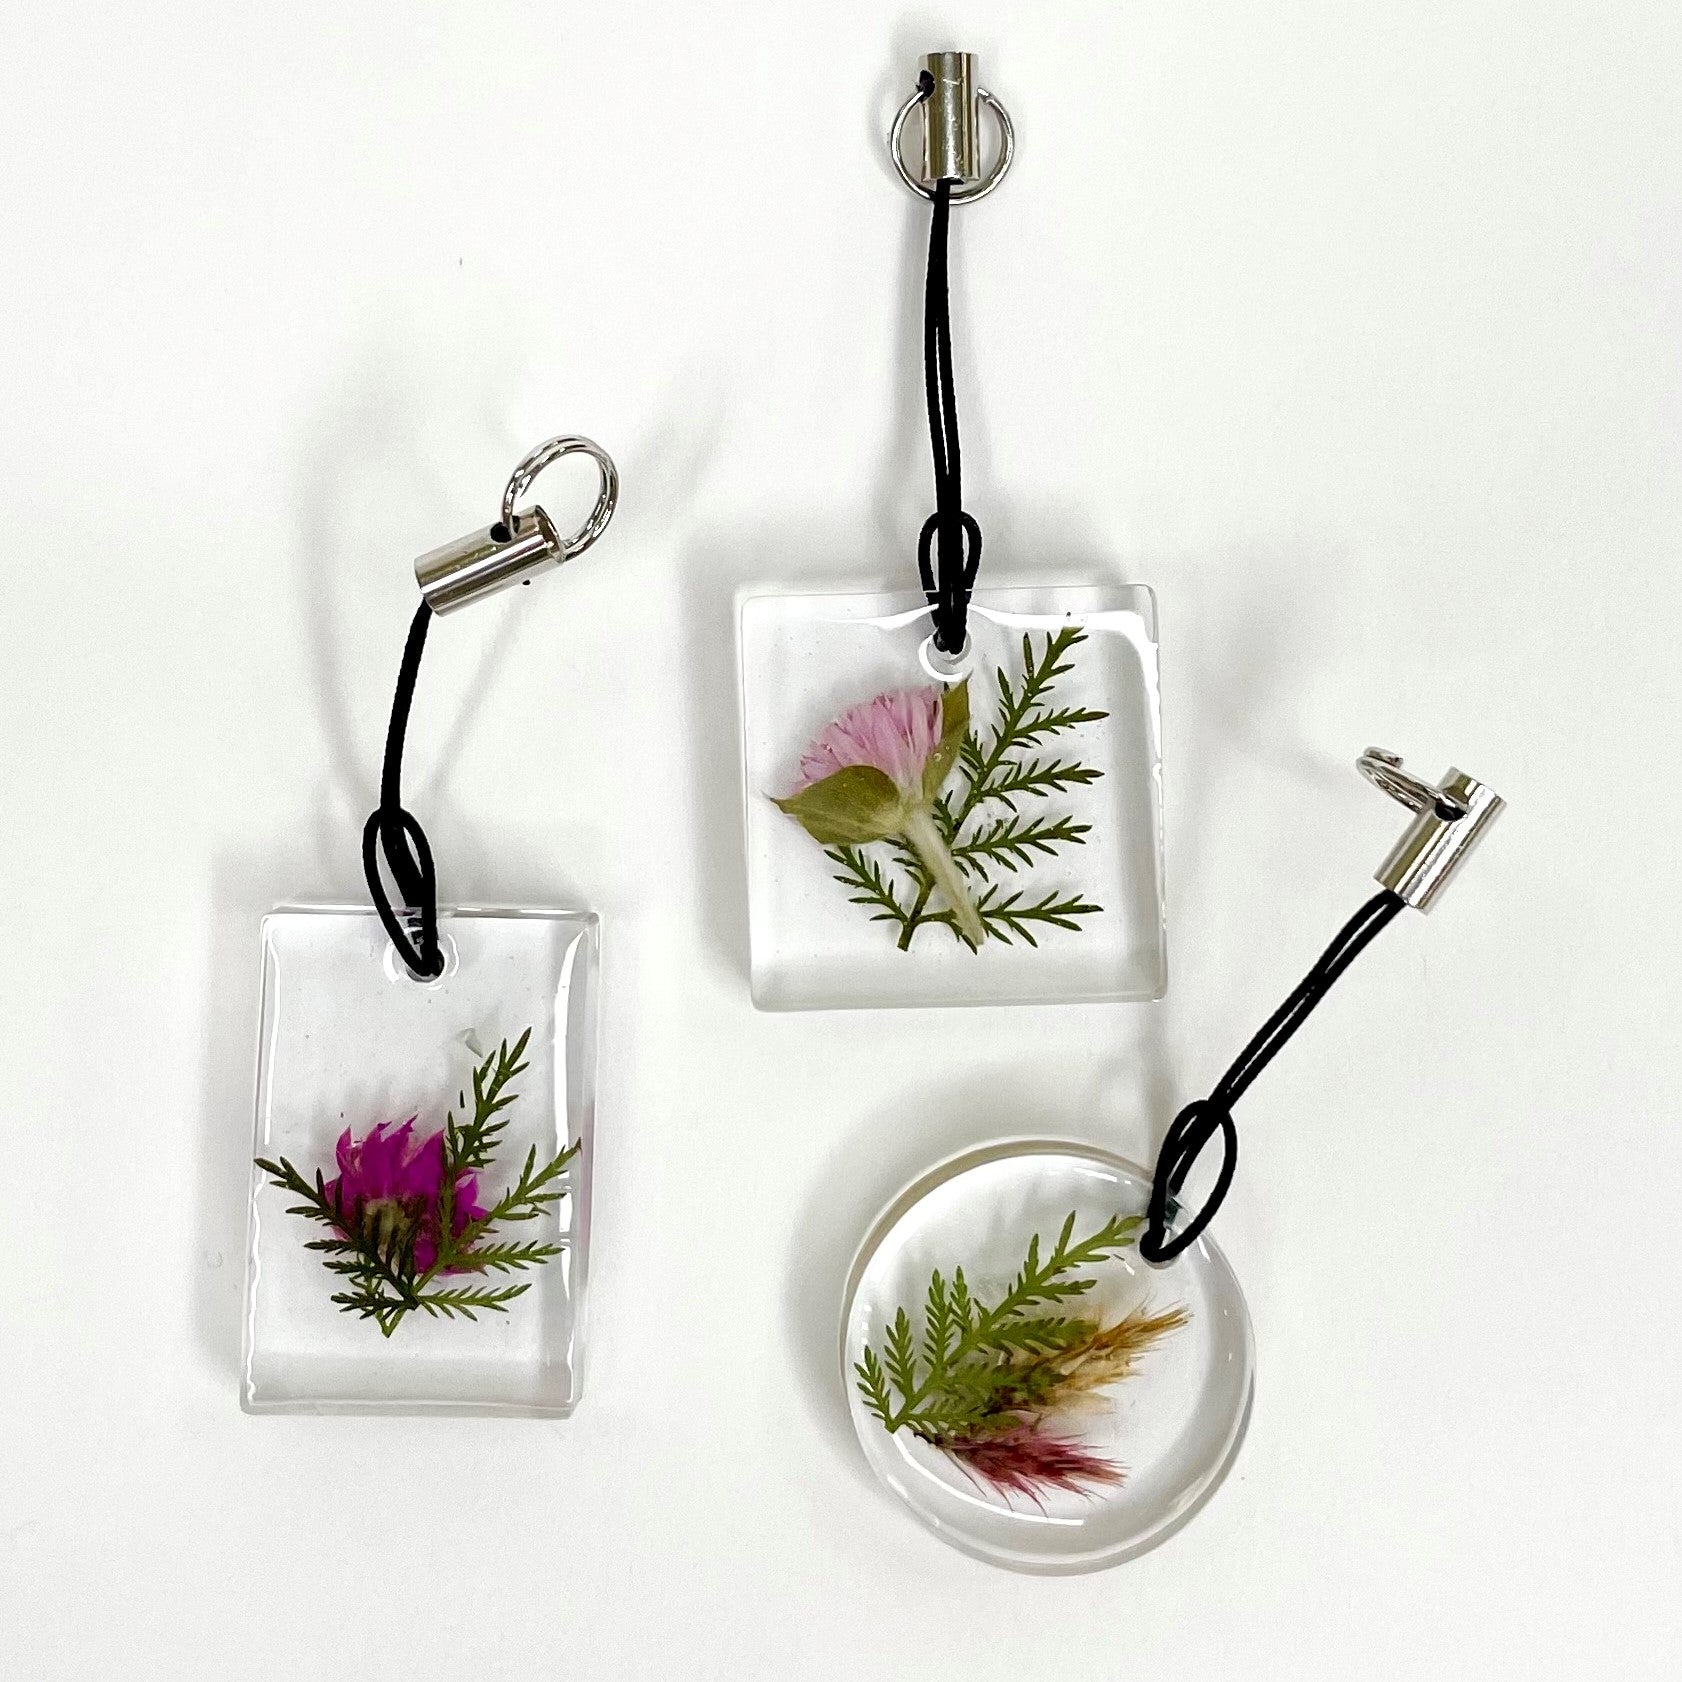 Key Chain with Dried Flowers in Resin Keychains 1818 Farms   